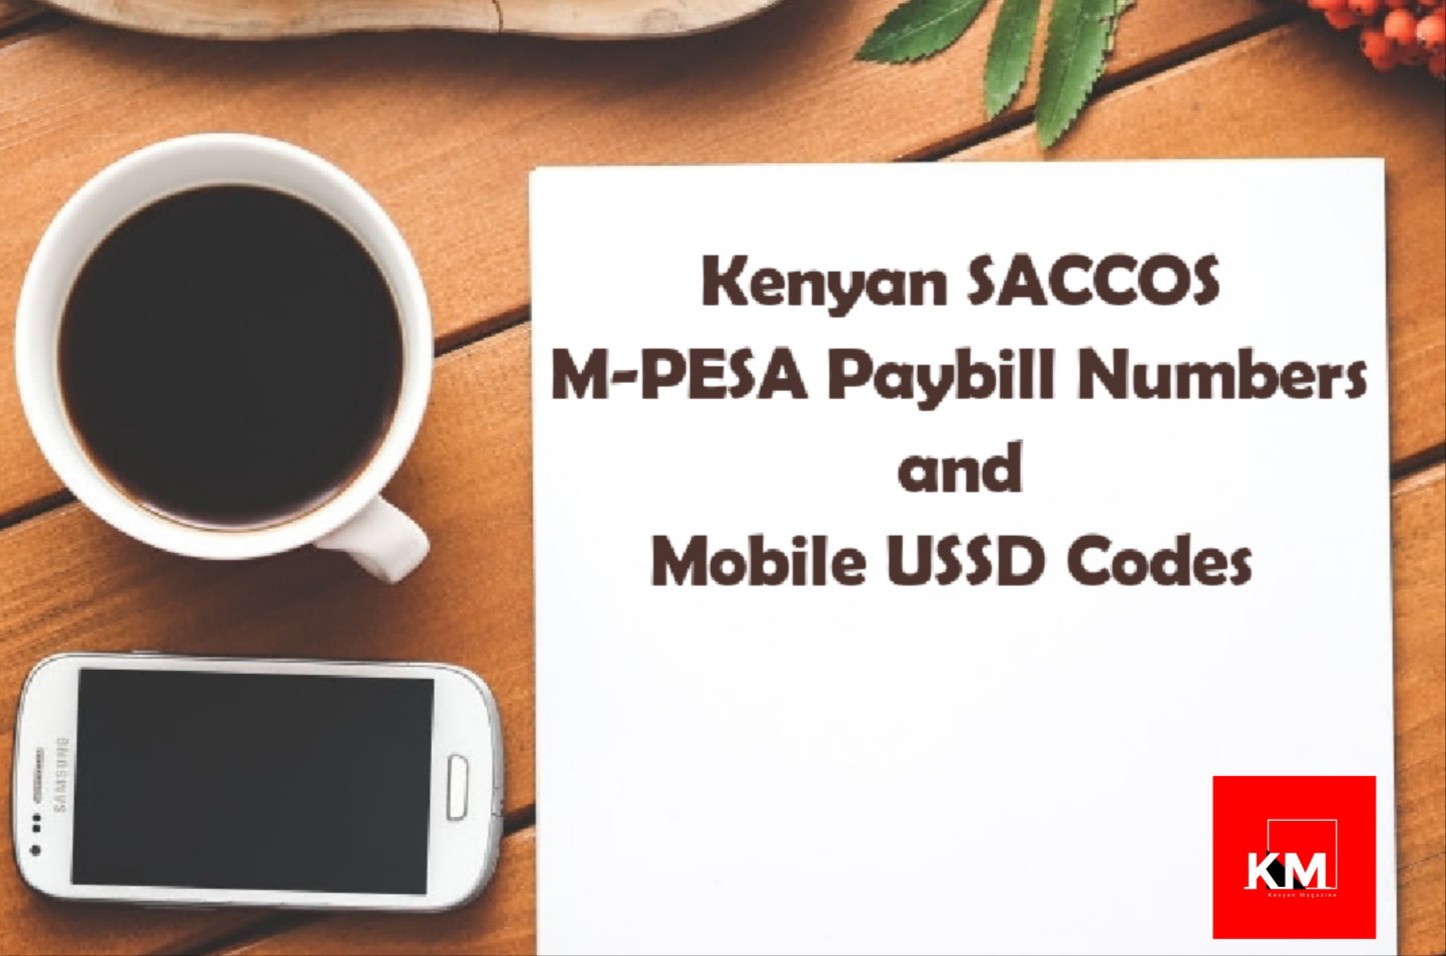 Kenyan SACCOS Paybill Numbers and USSD Codes